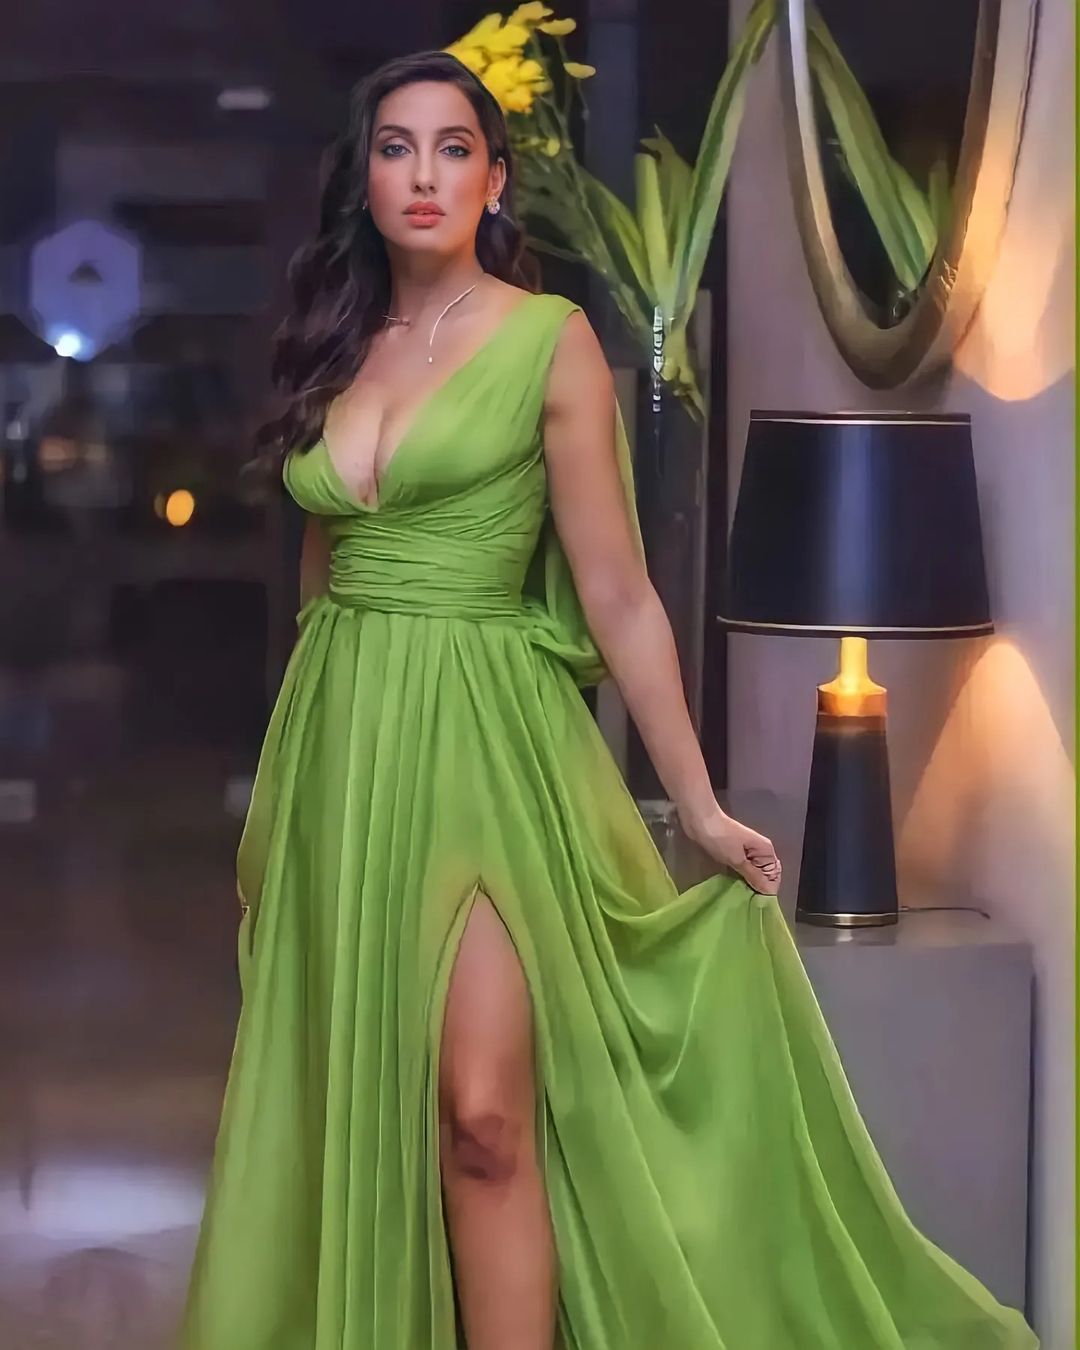 Nora Fatehi wreaked havoc again in a deep neck dress, posing in front of the camera by going braless